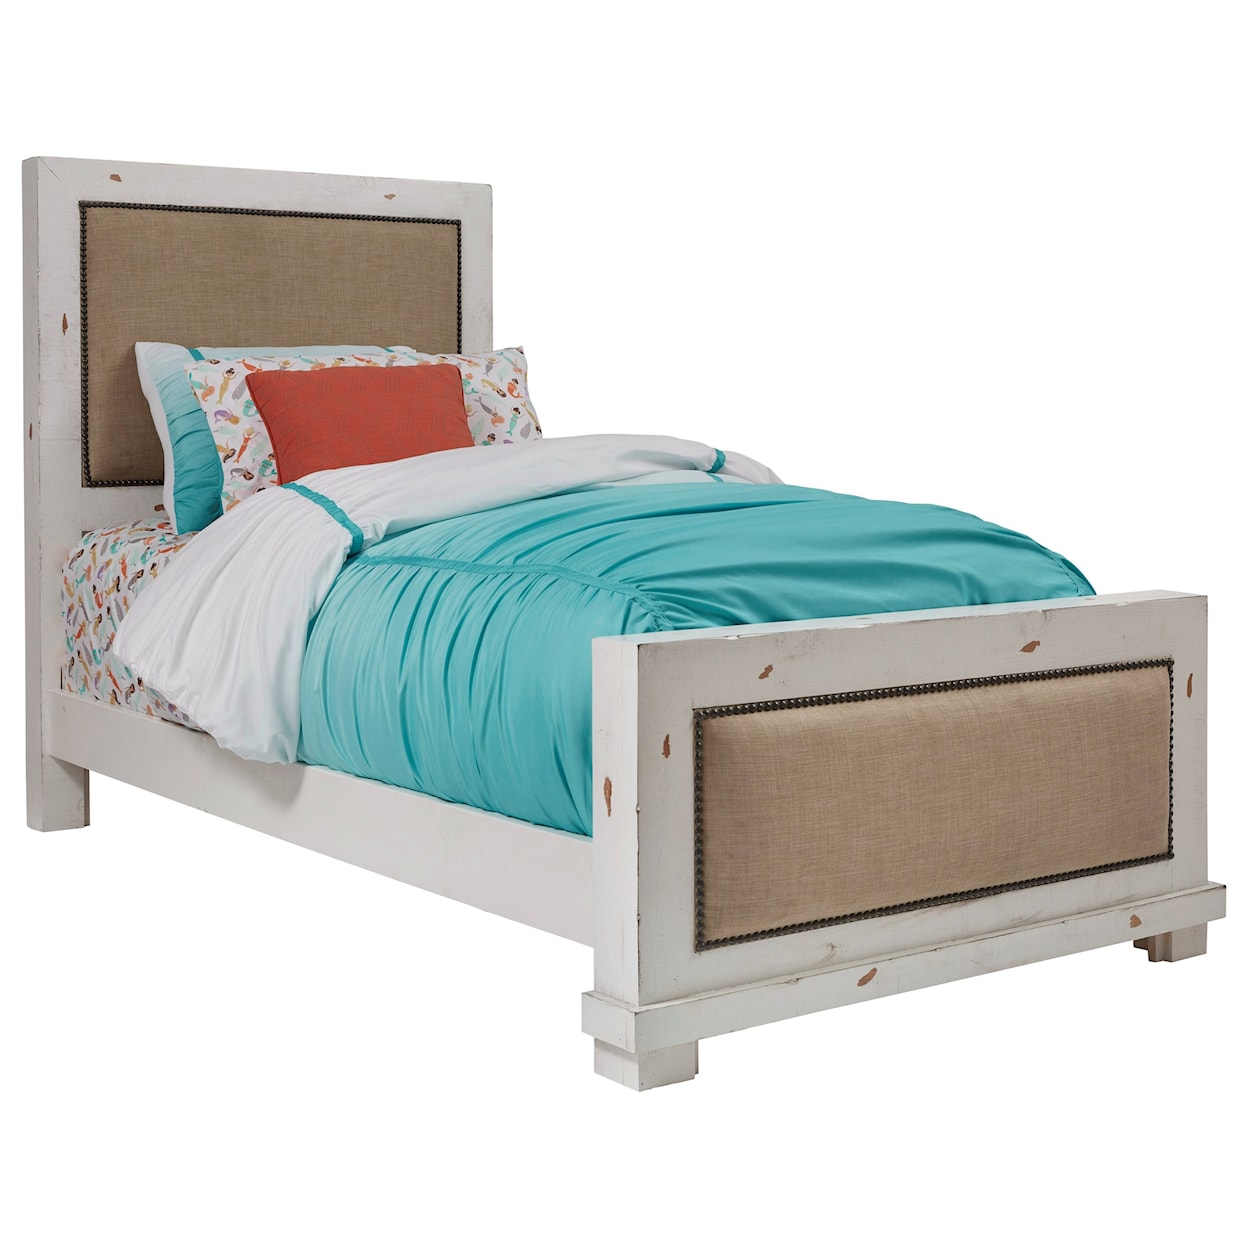 Carolina Chairs Willow Twin Upholstered Bed